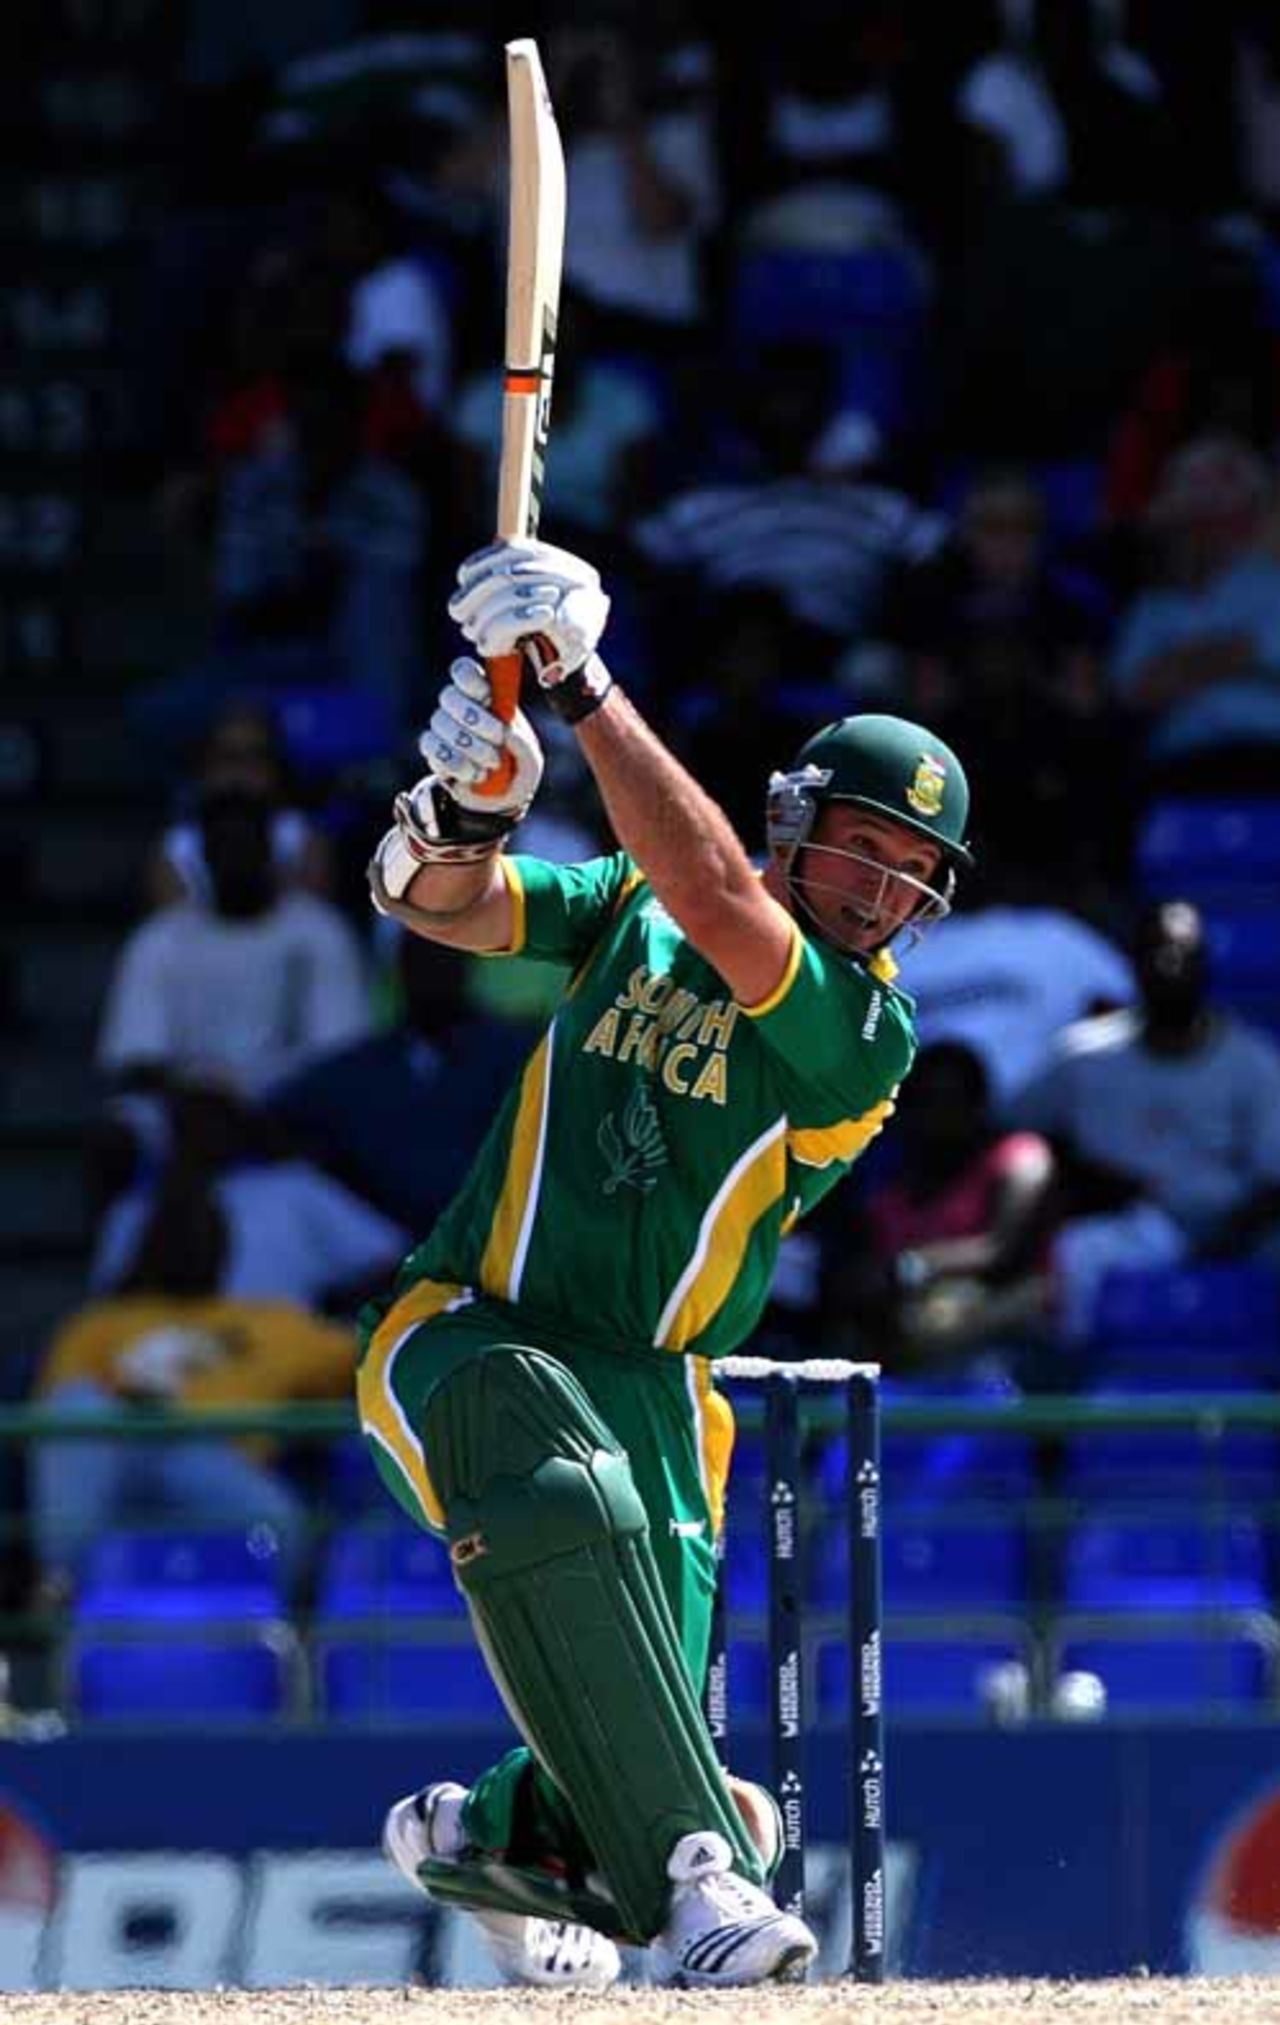 Graeme Smith launches into a booming drive, Group A, St Kitts, March 24, 2007